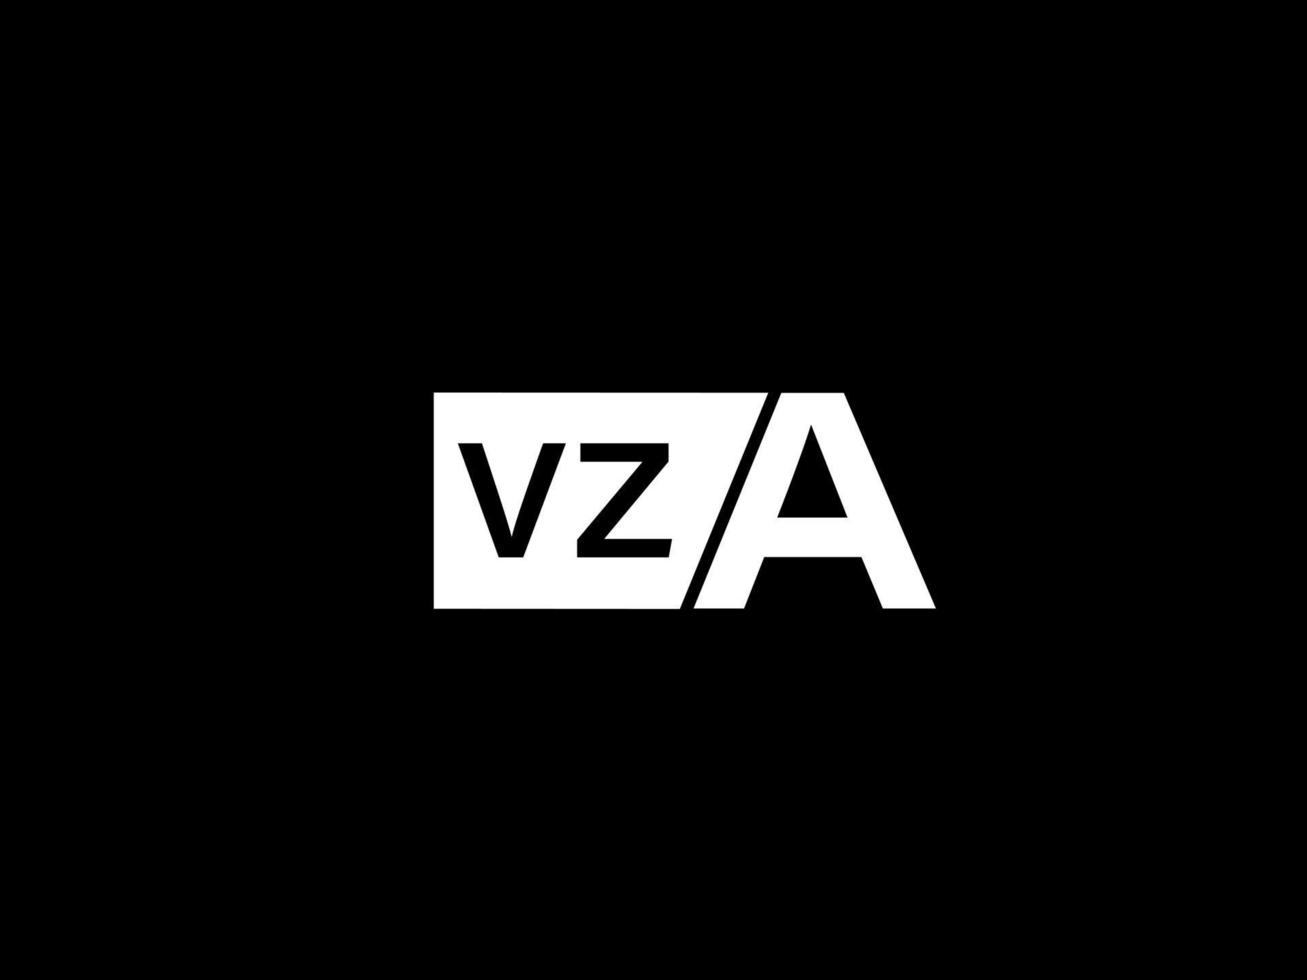 VZA Logo and Graphics design vector art, Icons isolated on black background